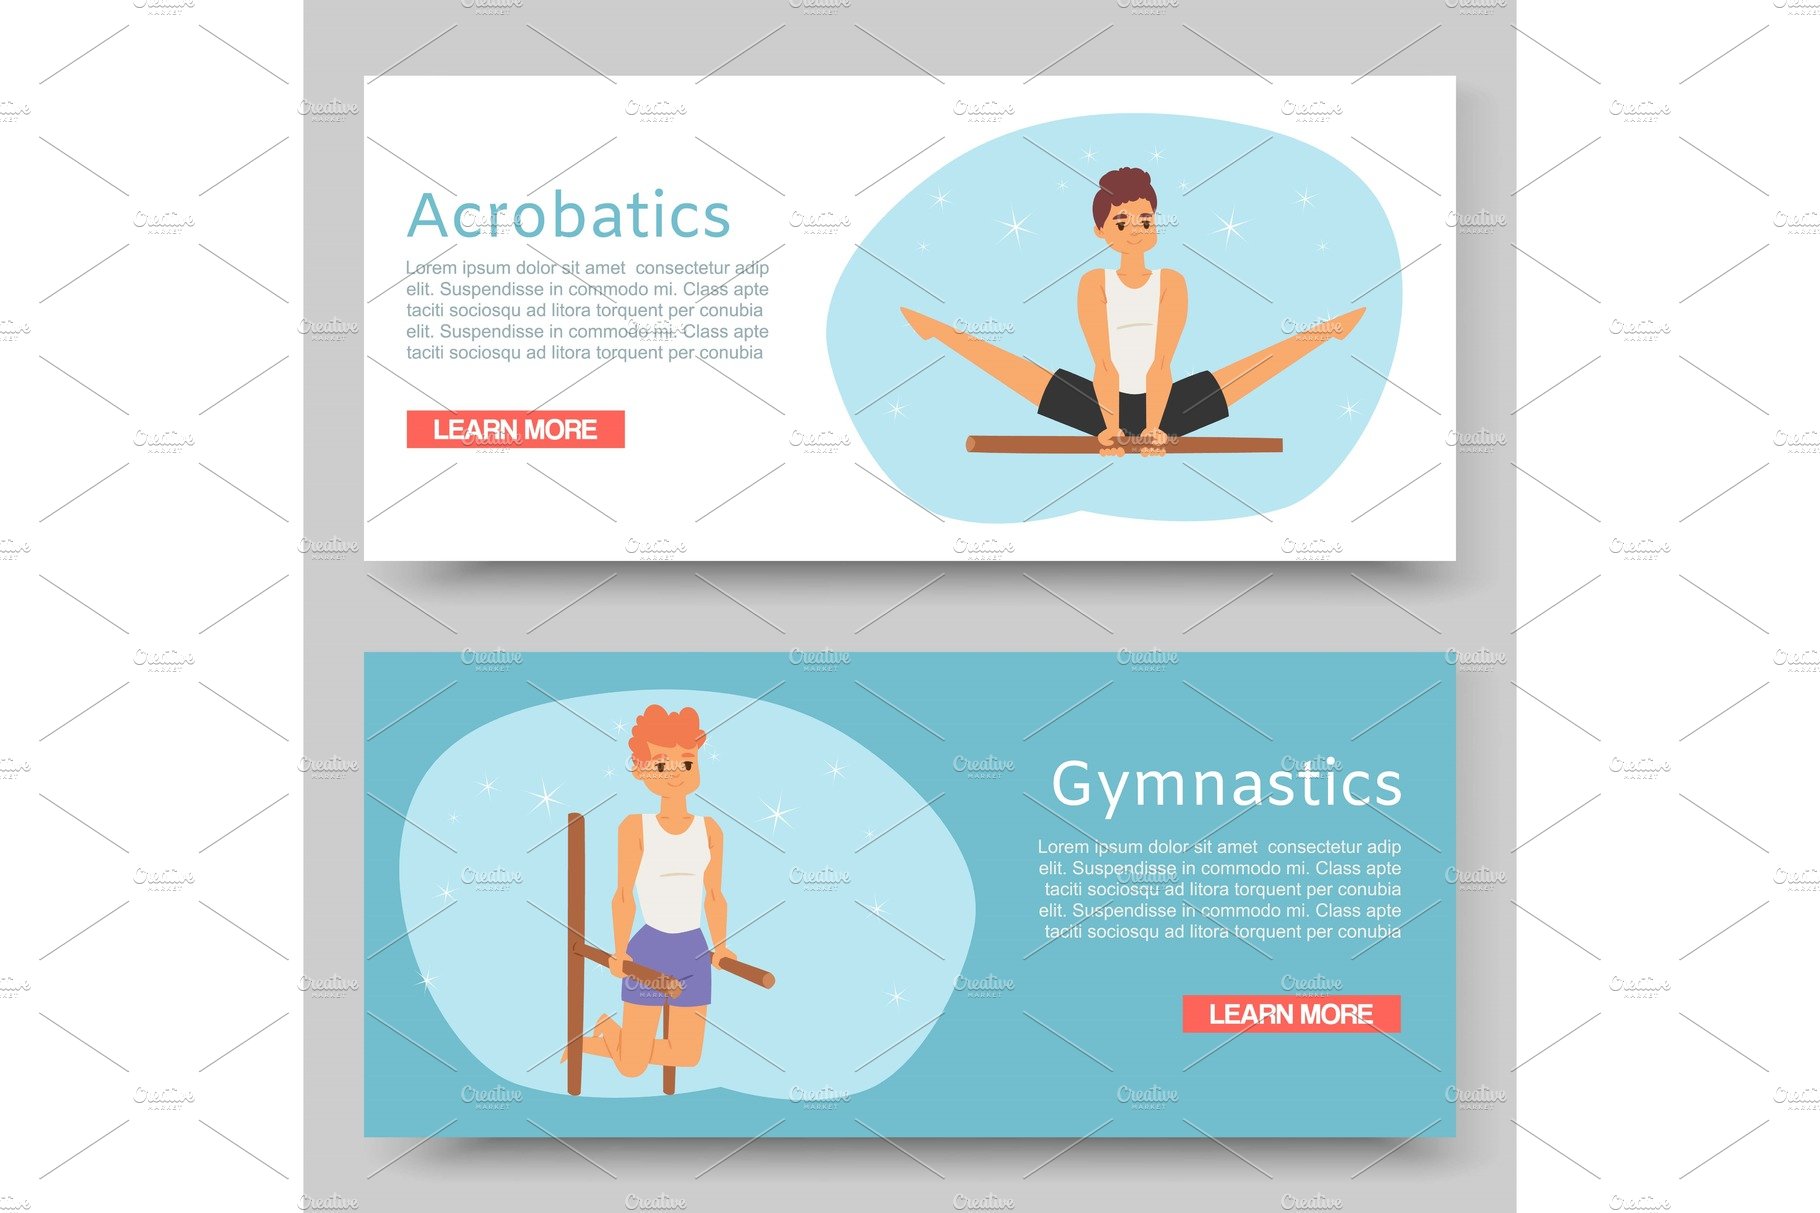 Gymnastic training and acrobatics on cover image.